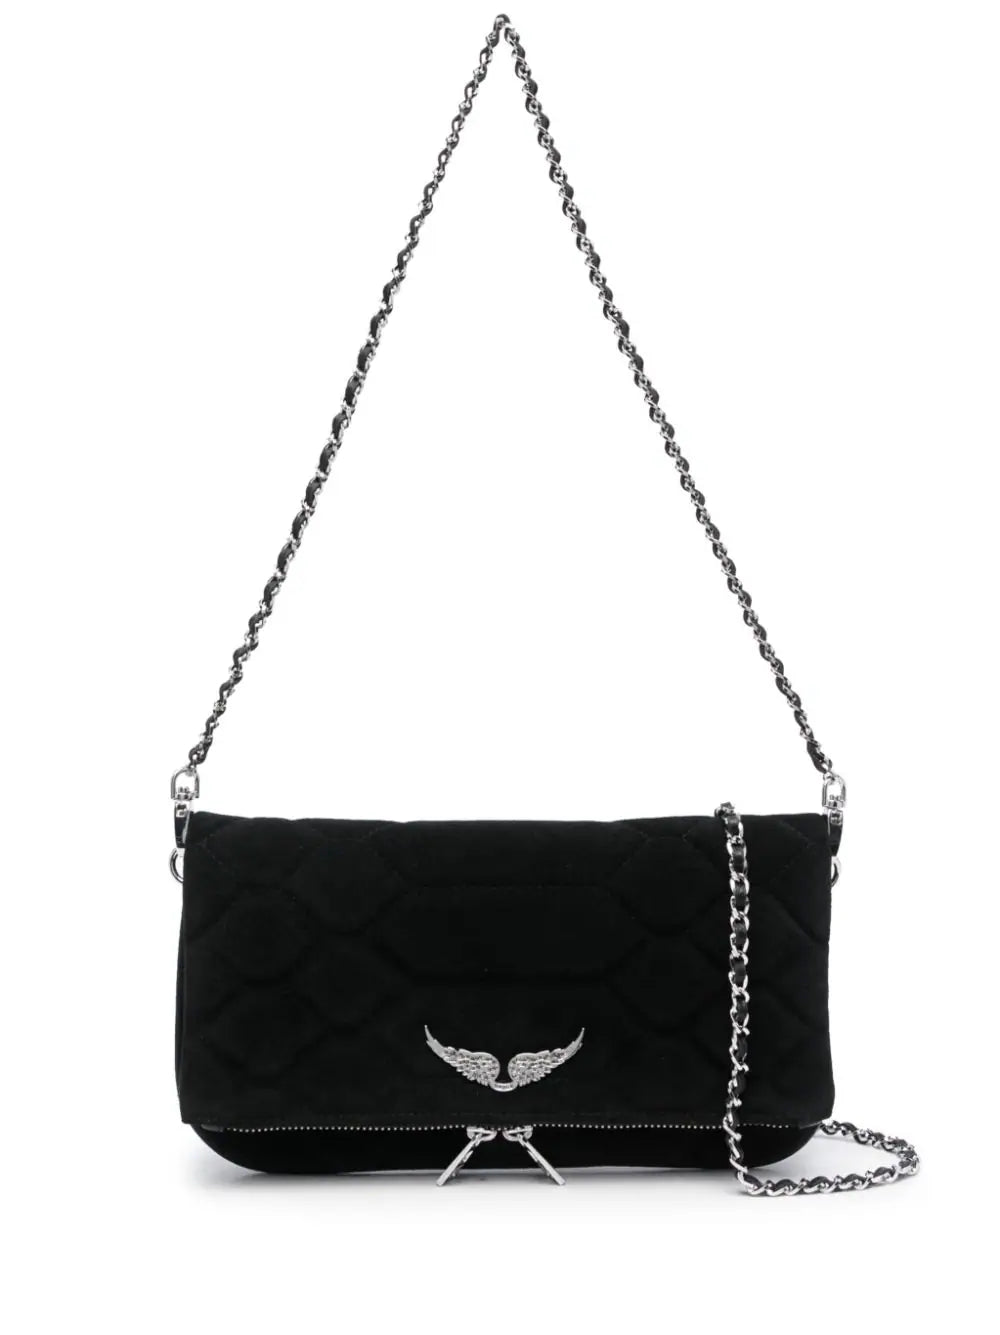 Rock leather crossbody bag Zadig & Voltaire Black in Leather